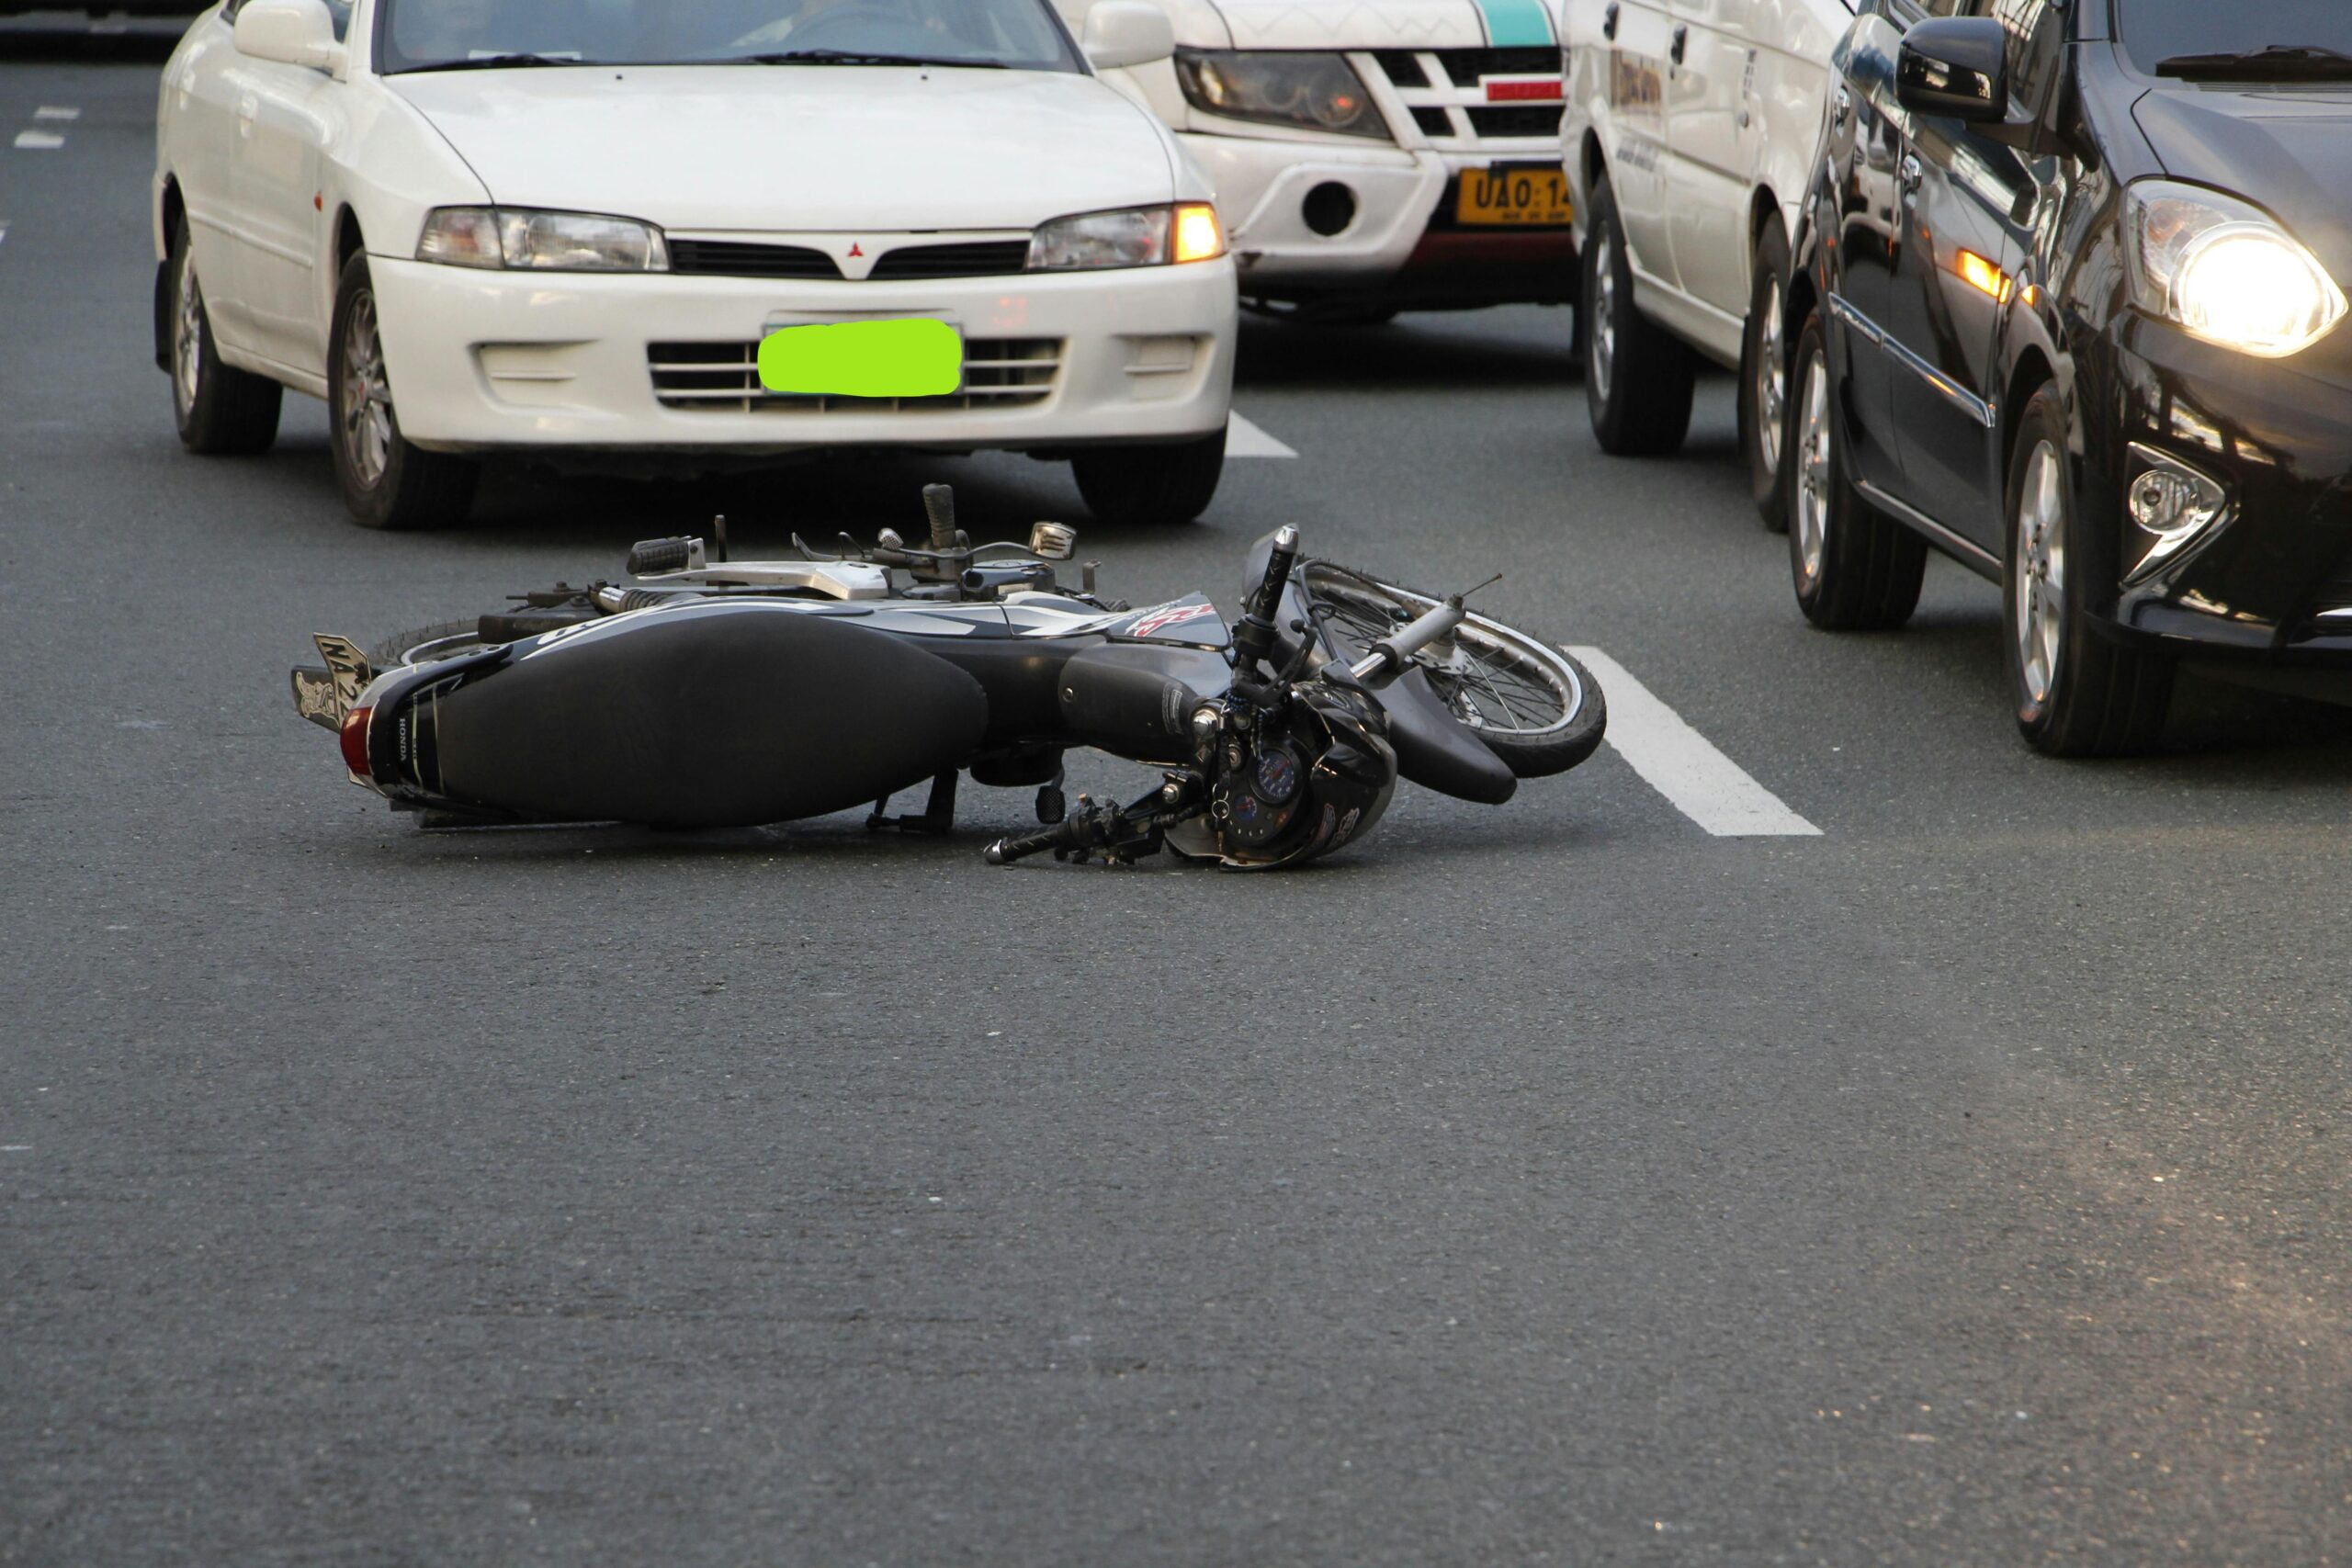 Unraveling the Complexity of Liability Determinations in Motorcycle Accidents